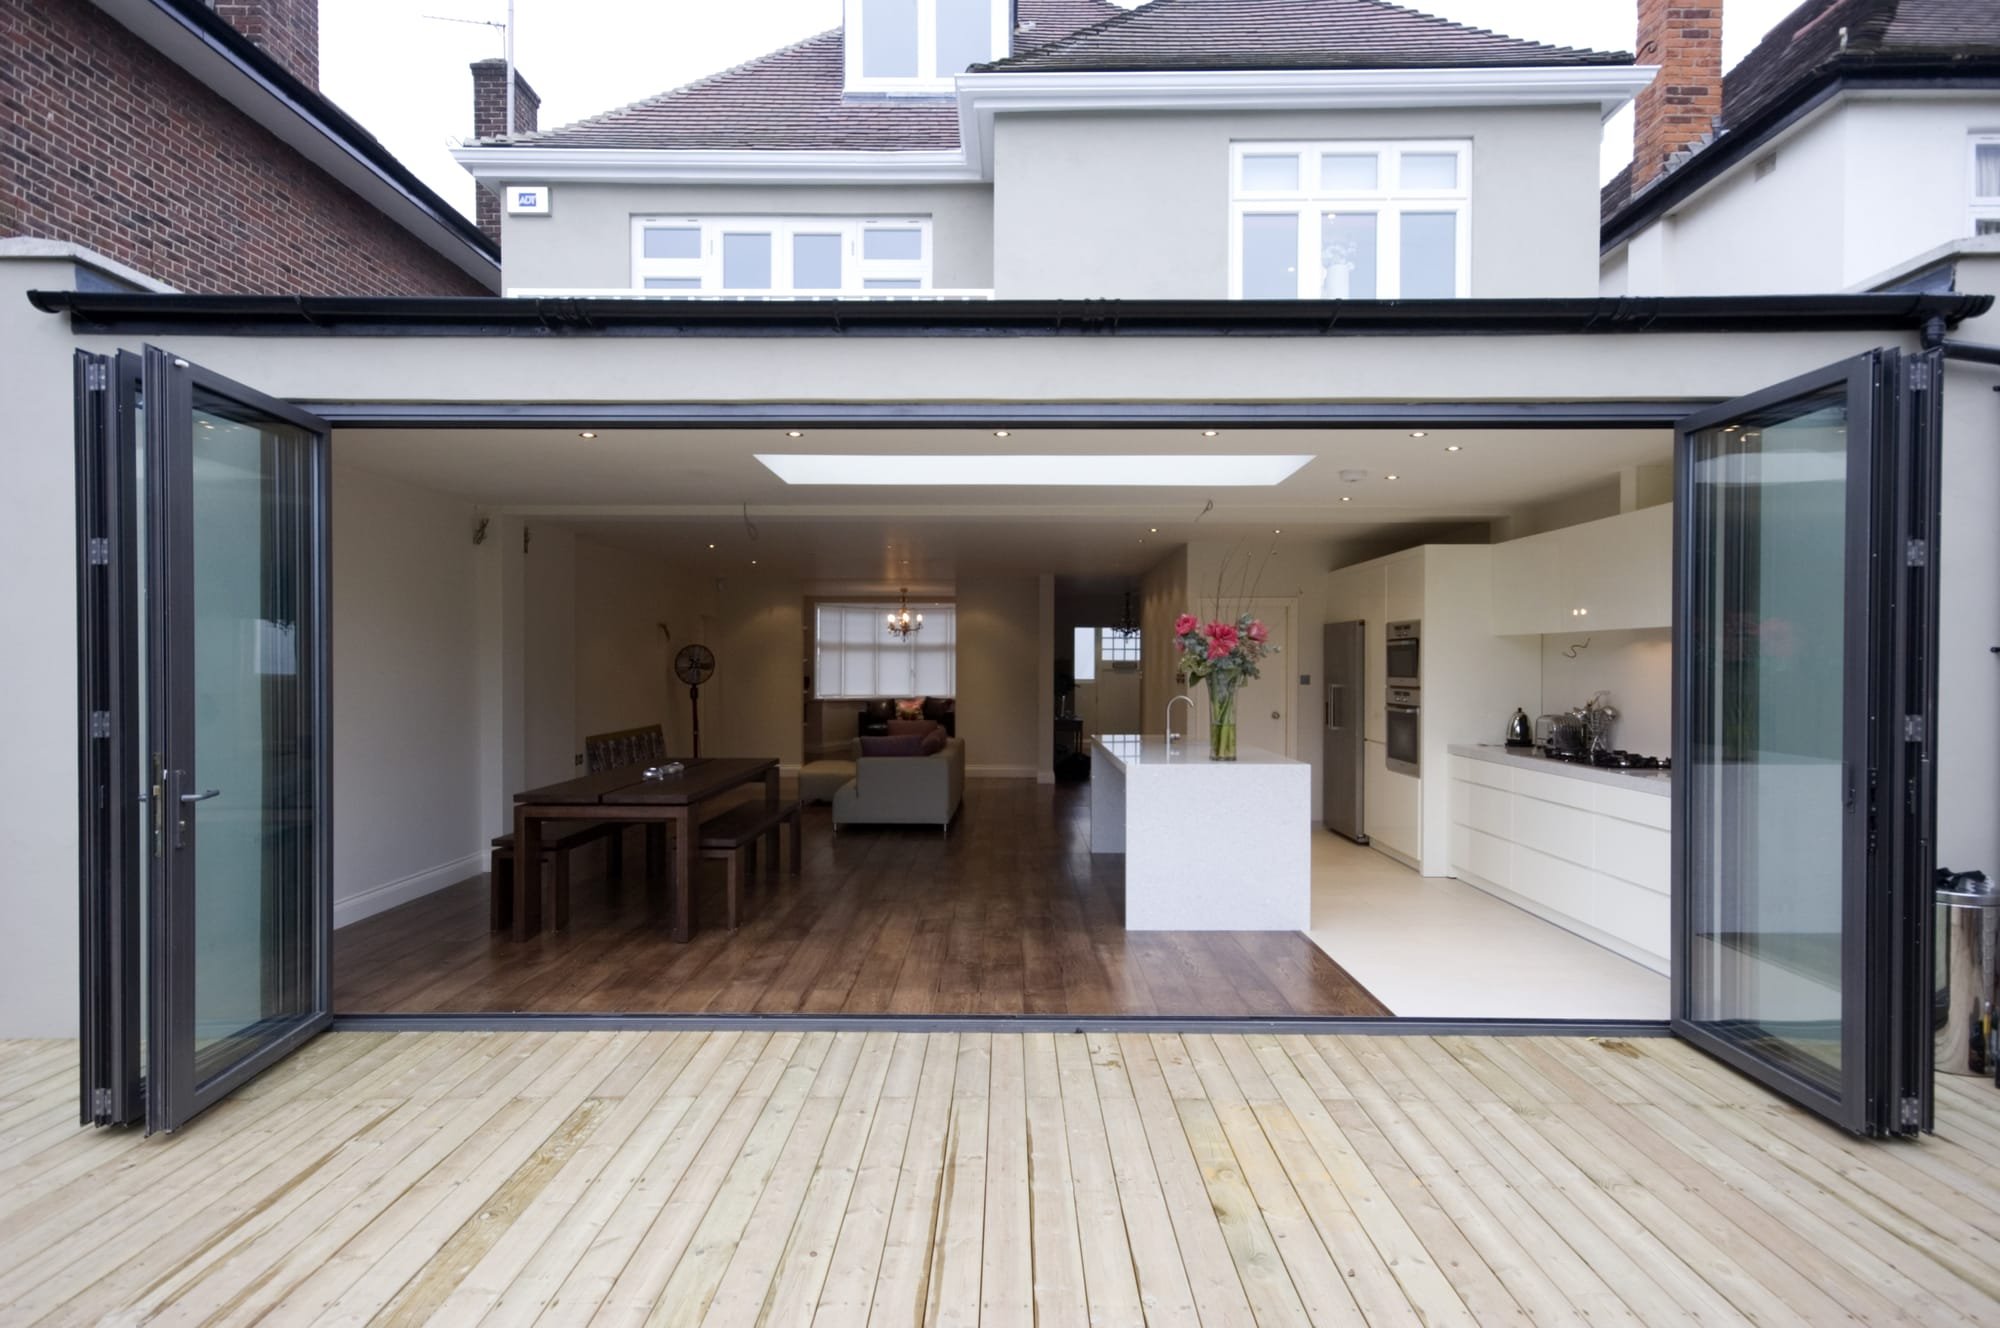 Large rear / side / wrap around extension on this Balham detatched house with bi-fold doors